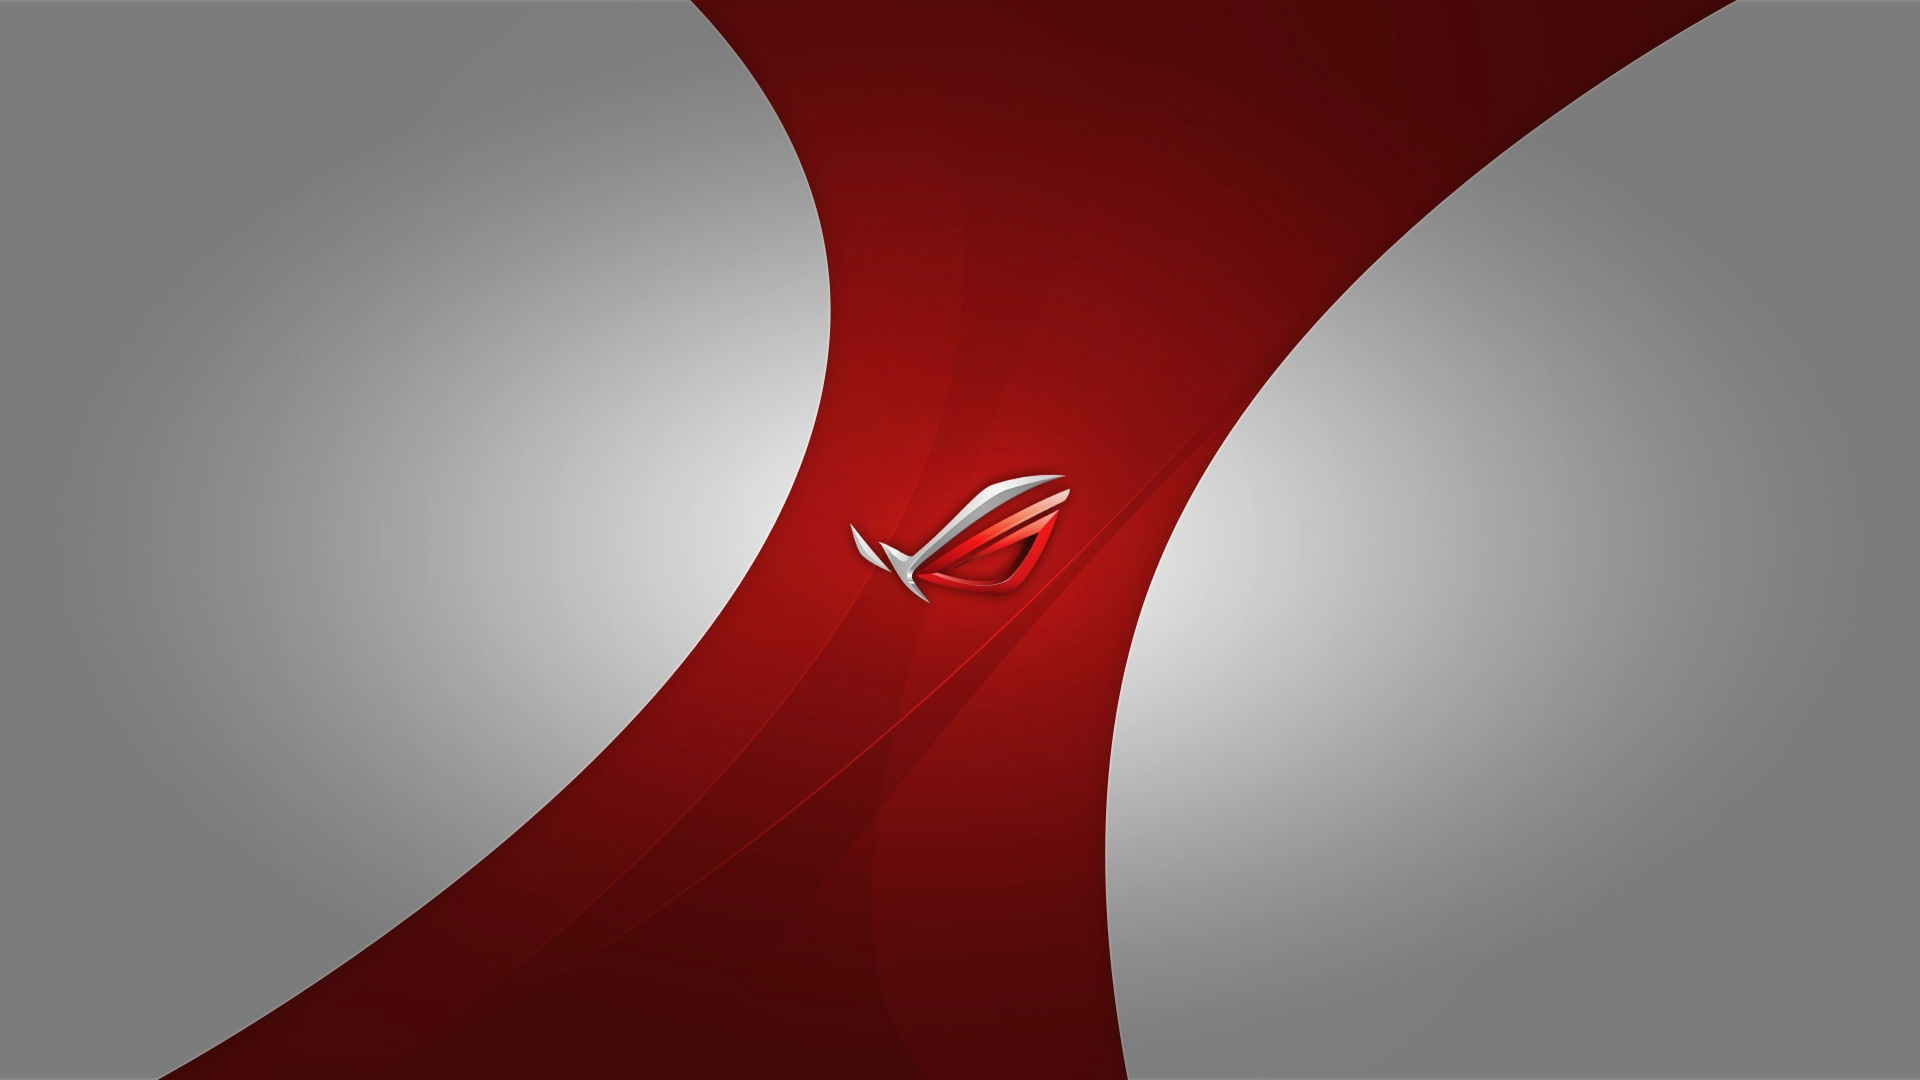 Wallpaper Asus Rog Republic Of Gamers Technology